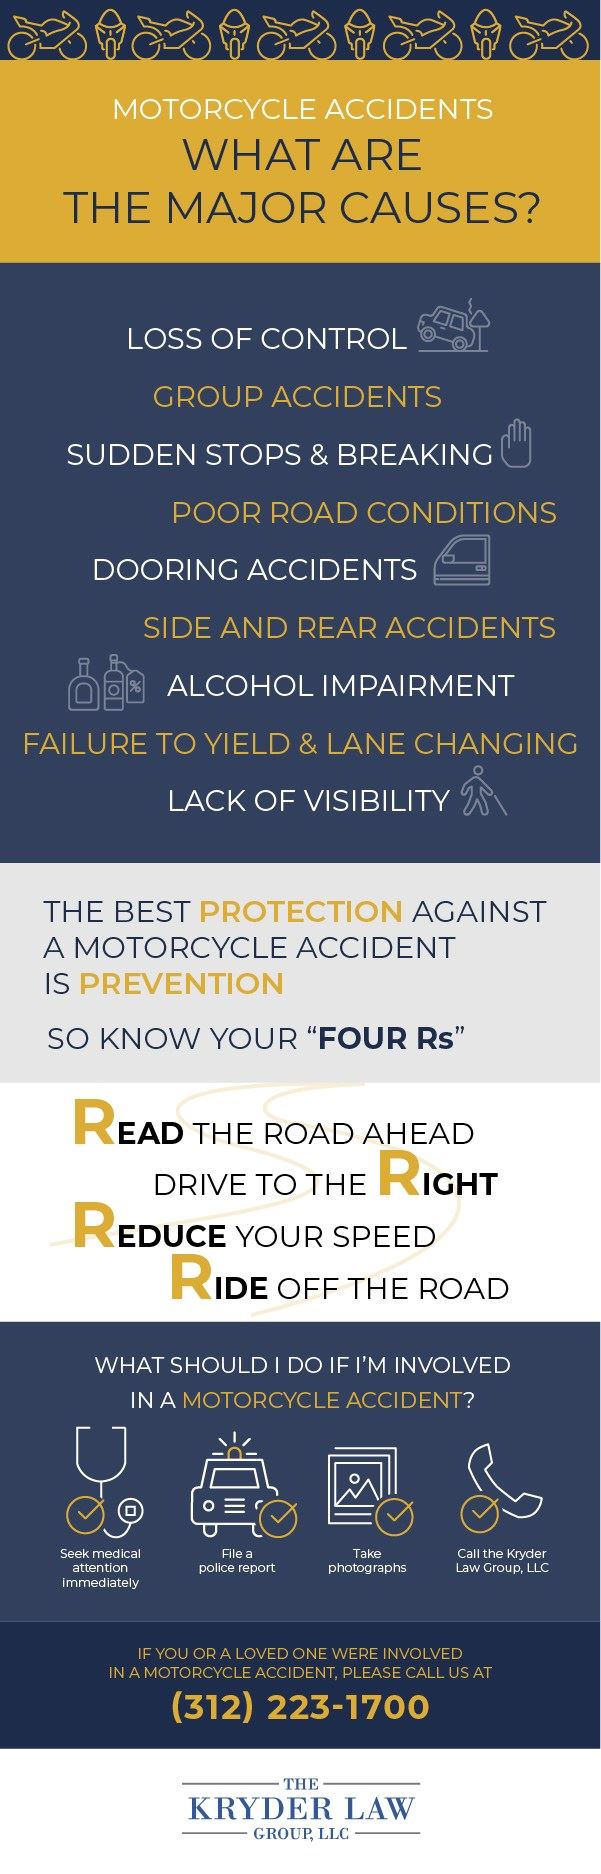 Illinois Motorcycle Accidents Infographic 3